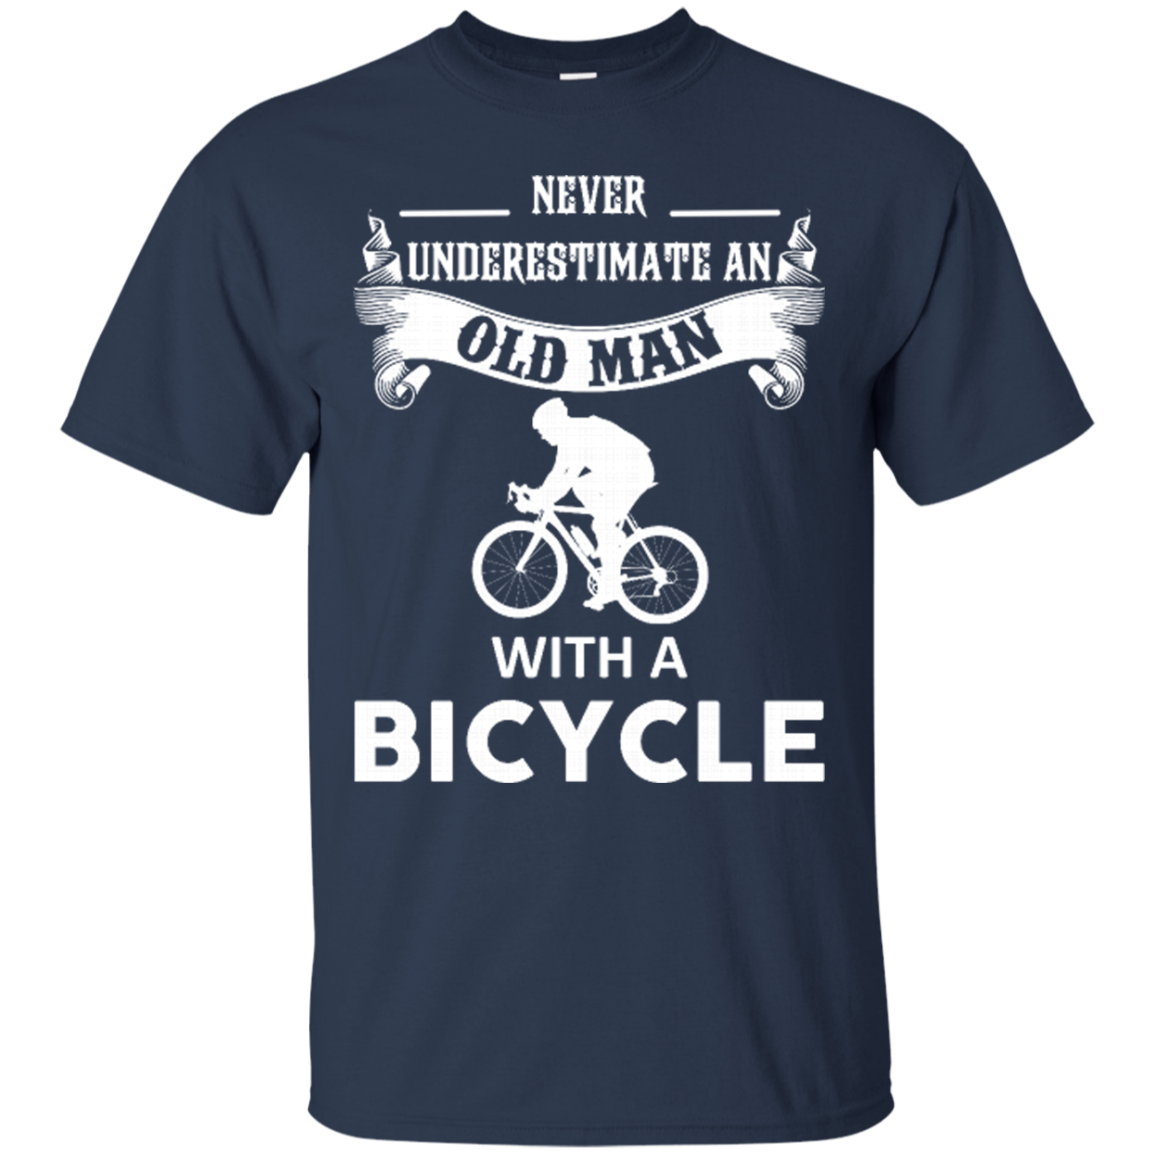 Bicycle Old Man Shirts Old Man With A Bicycle - Teesmiley